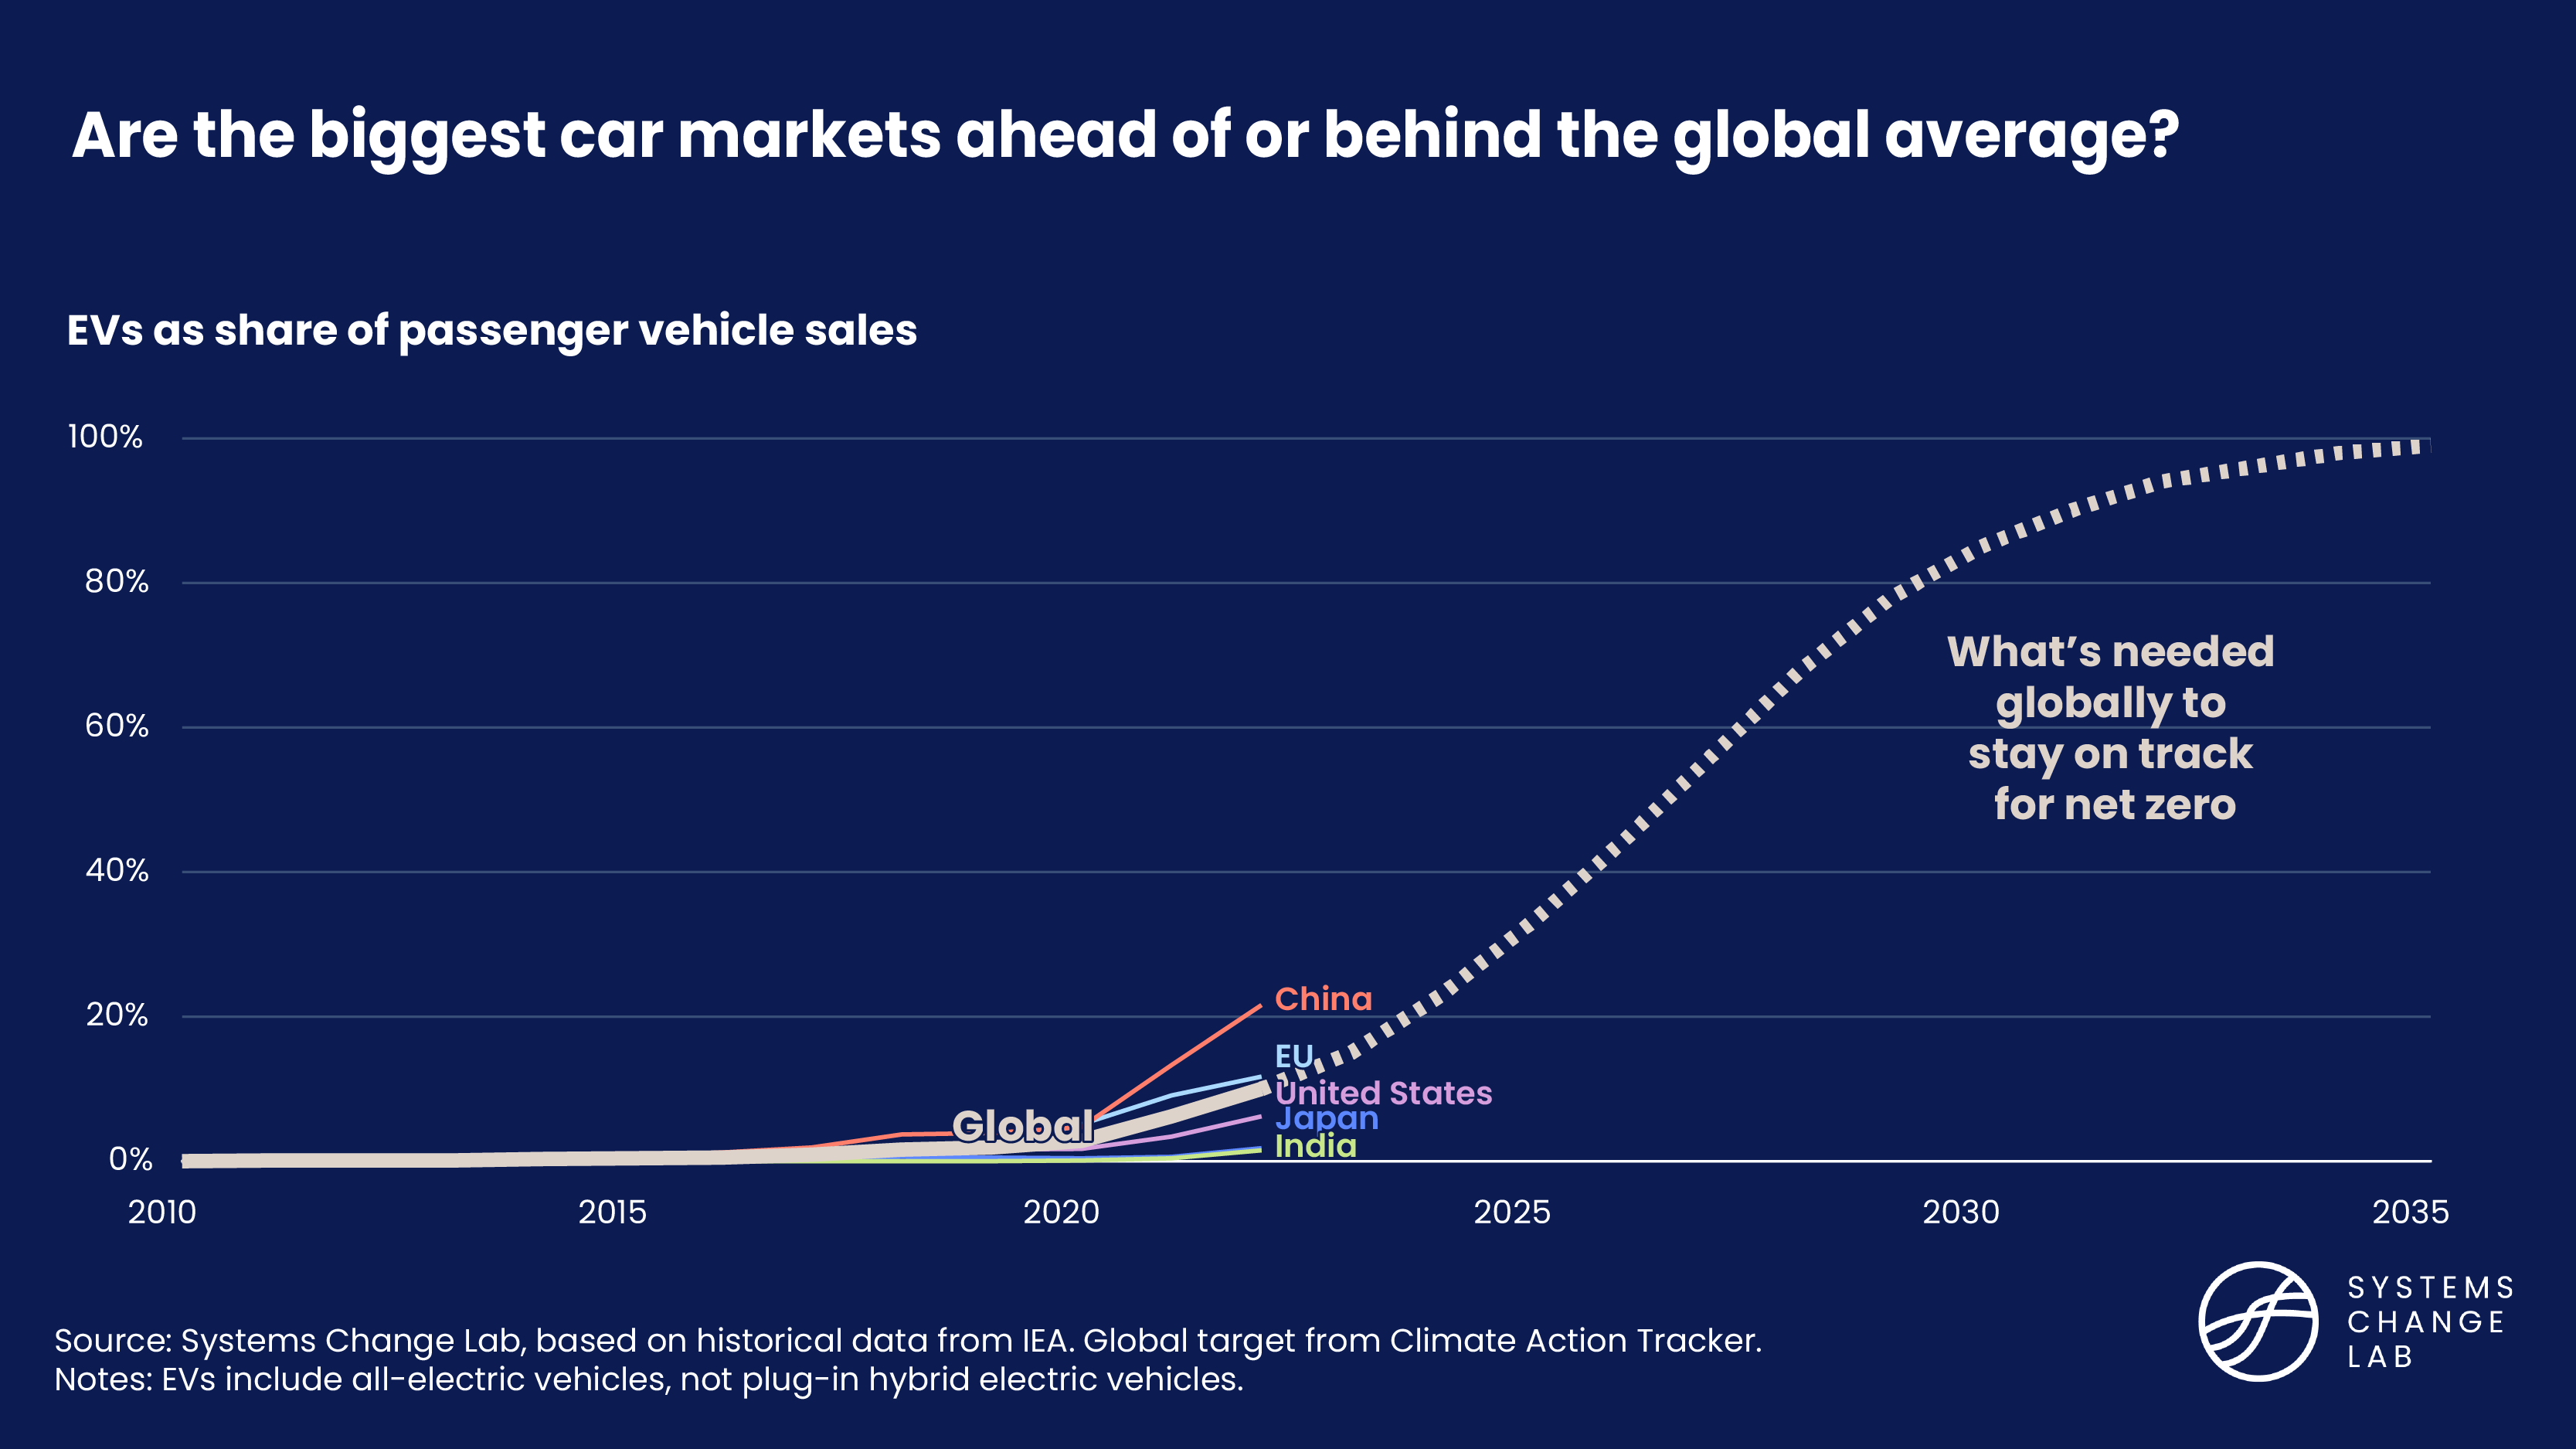 Are the biggest car markets ahead of or behind the global average?